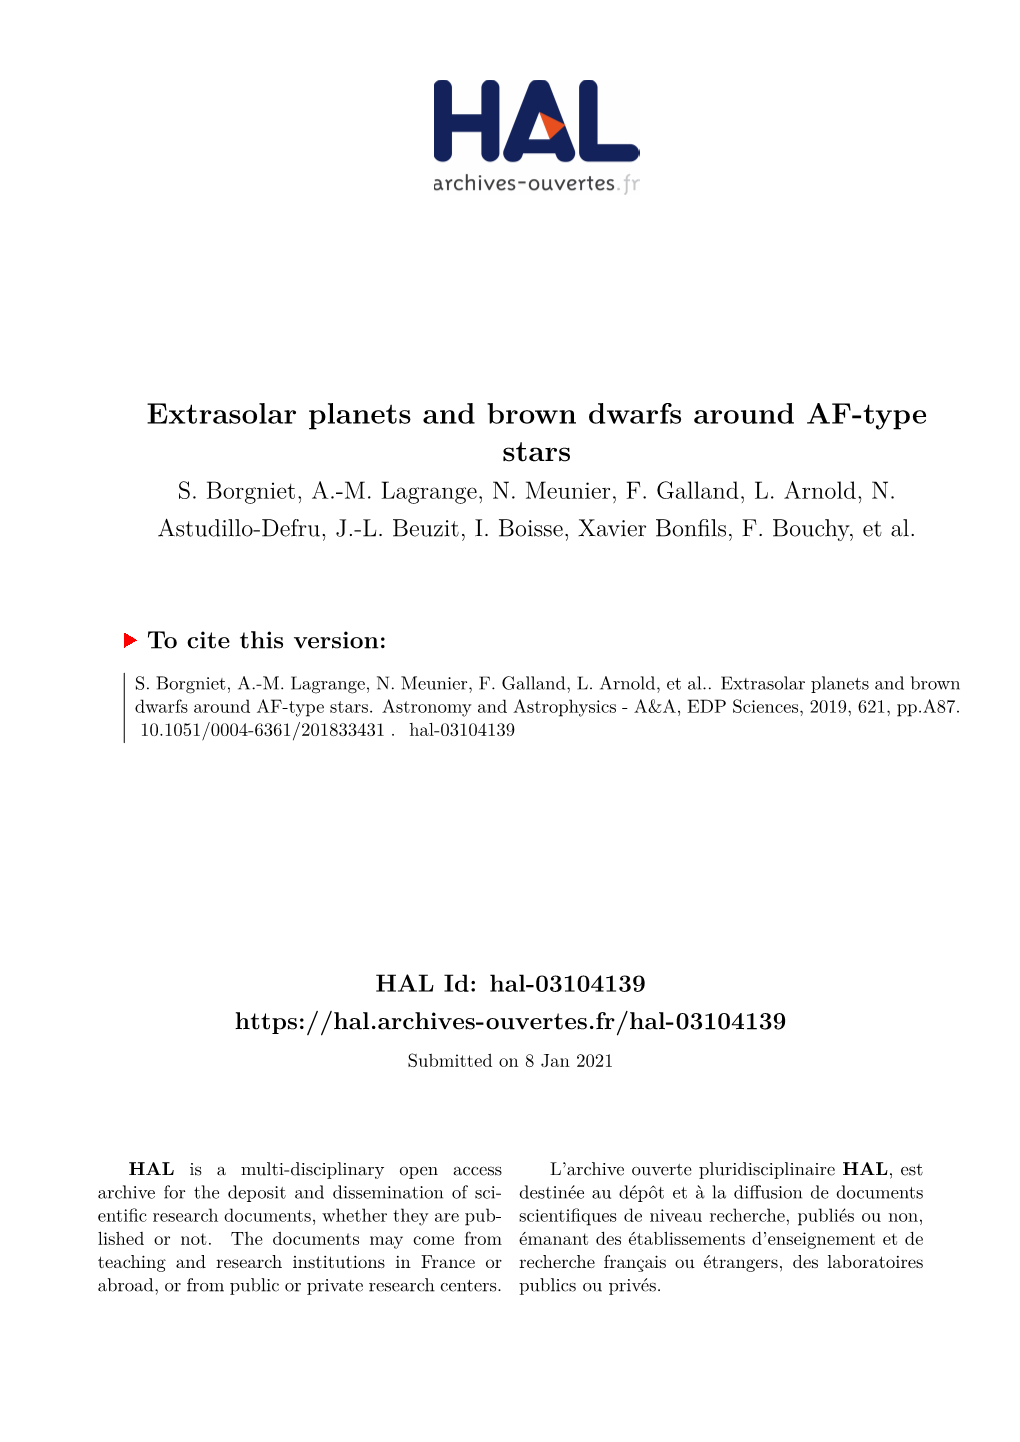 Extrasolar Planets and Brown Dwarfs Around AF-Type Stars S